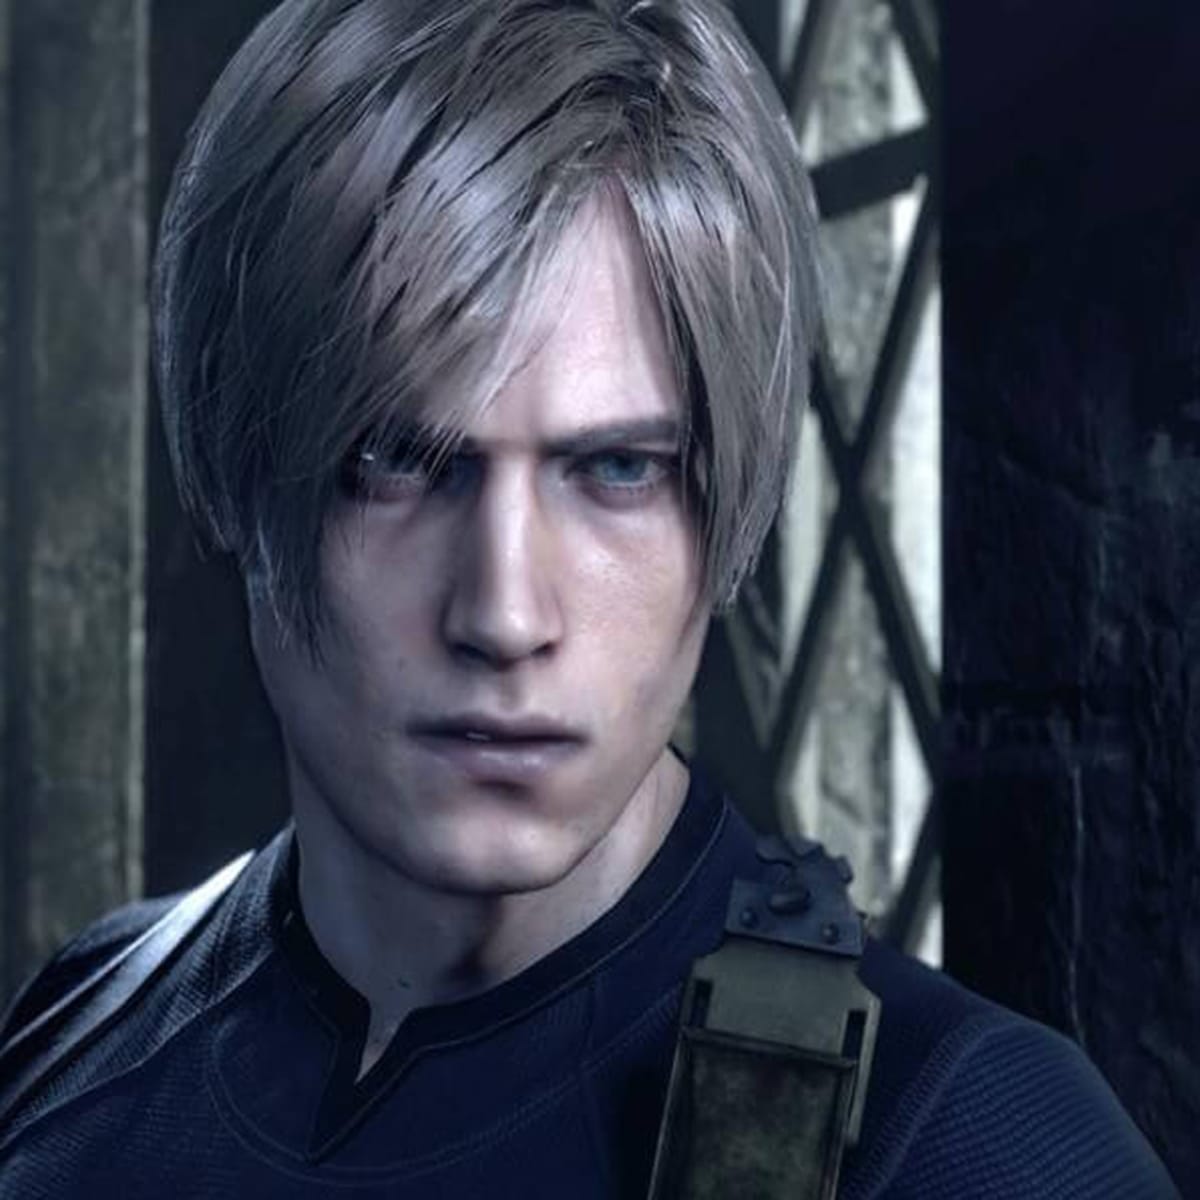 Resident Evil: This remake of a REmake's still got it